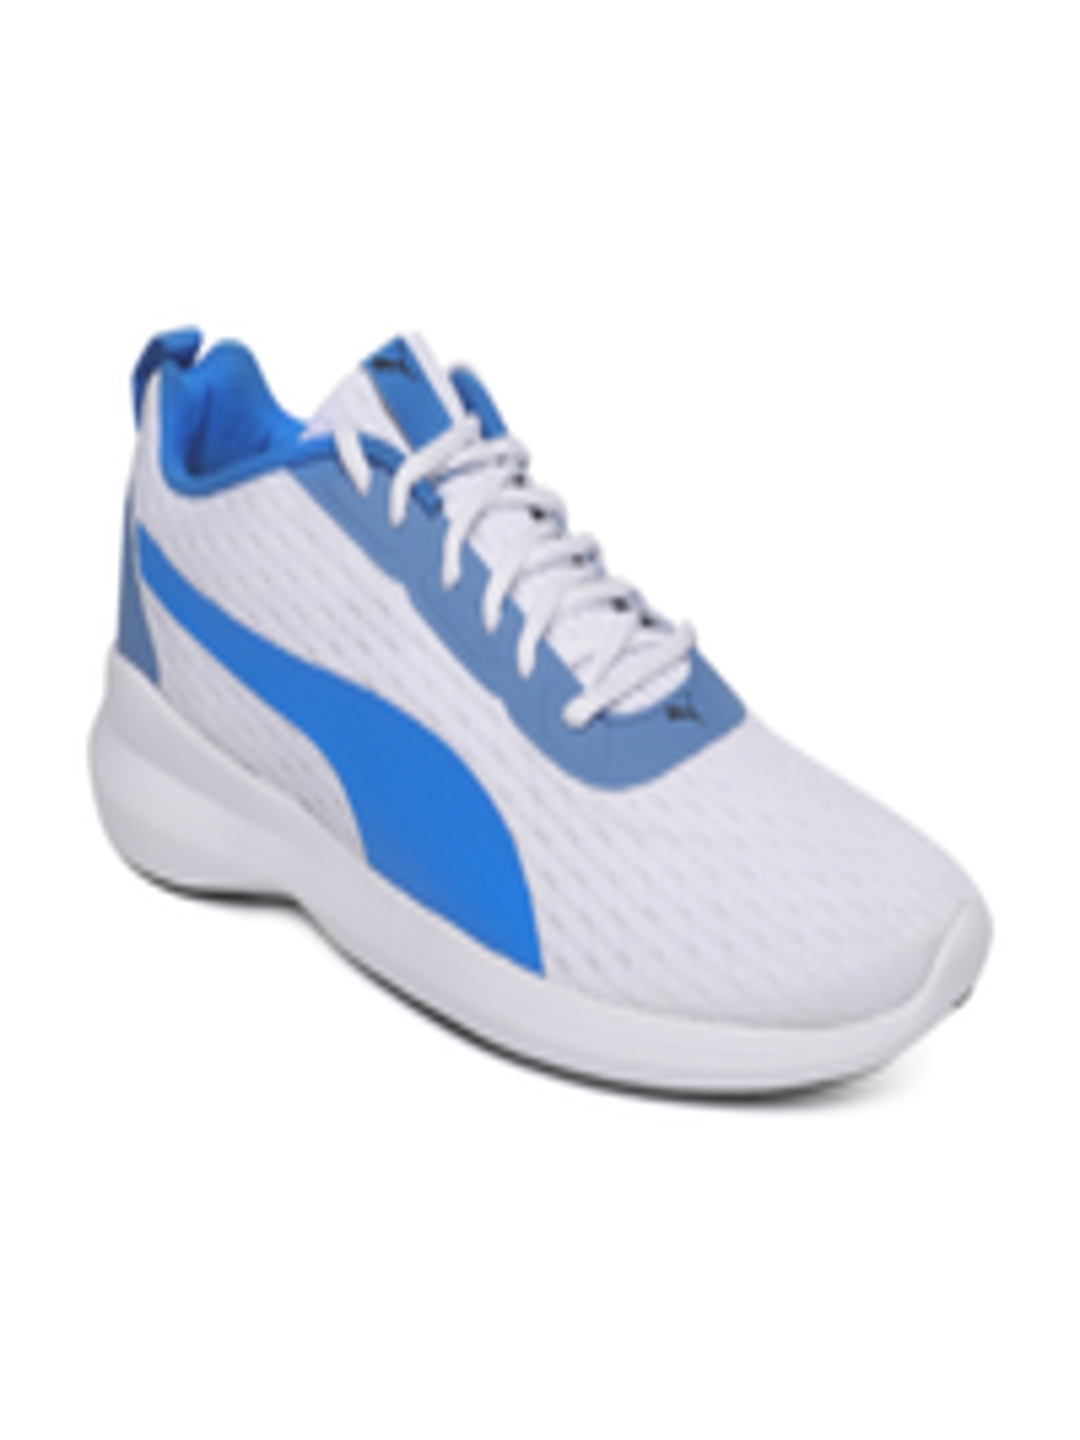 Buy Puma Men White Blue Player V2 Sneakers - Casual Shoes for Men ...